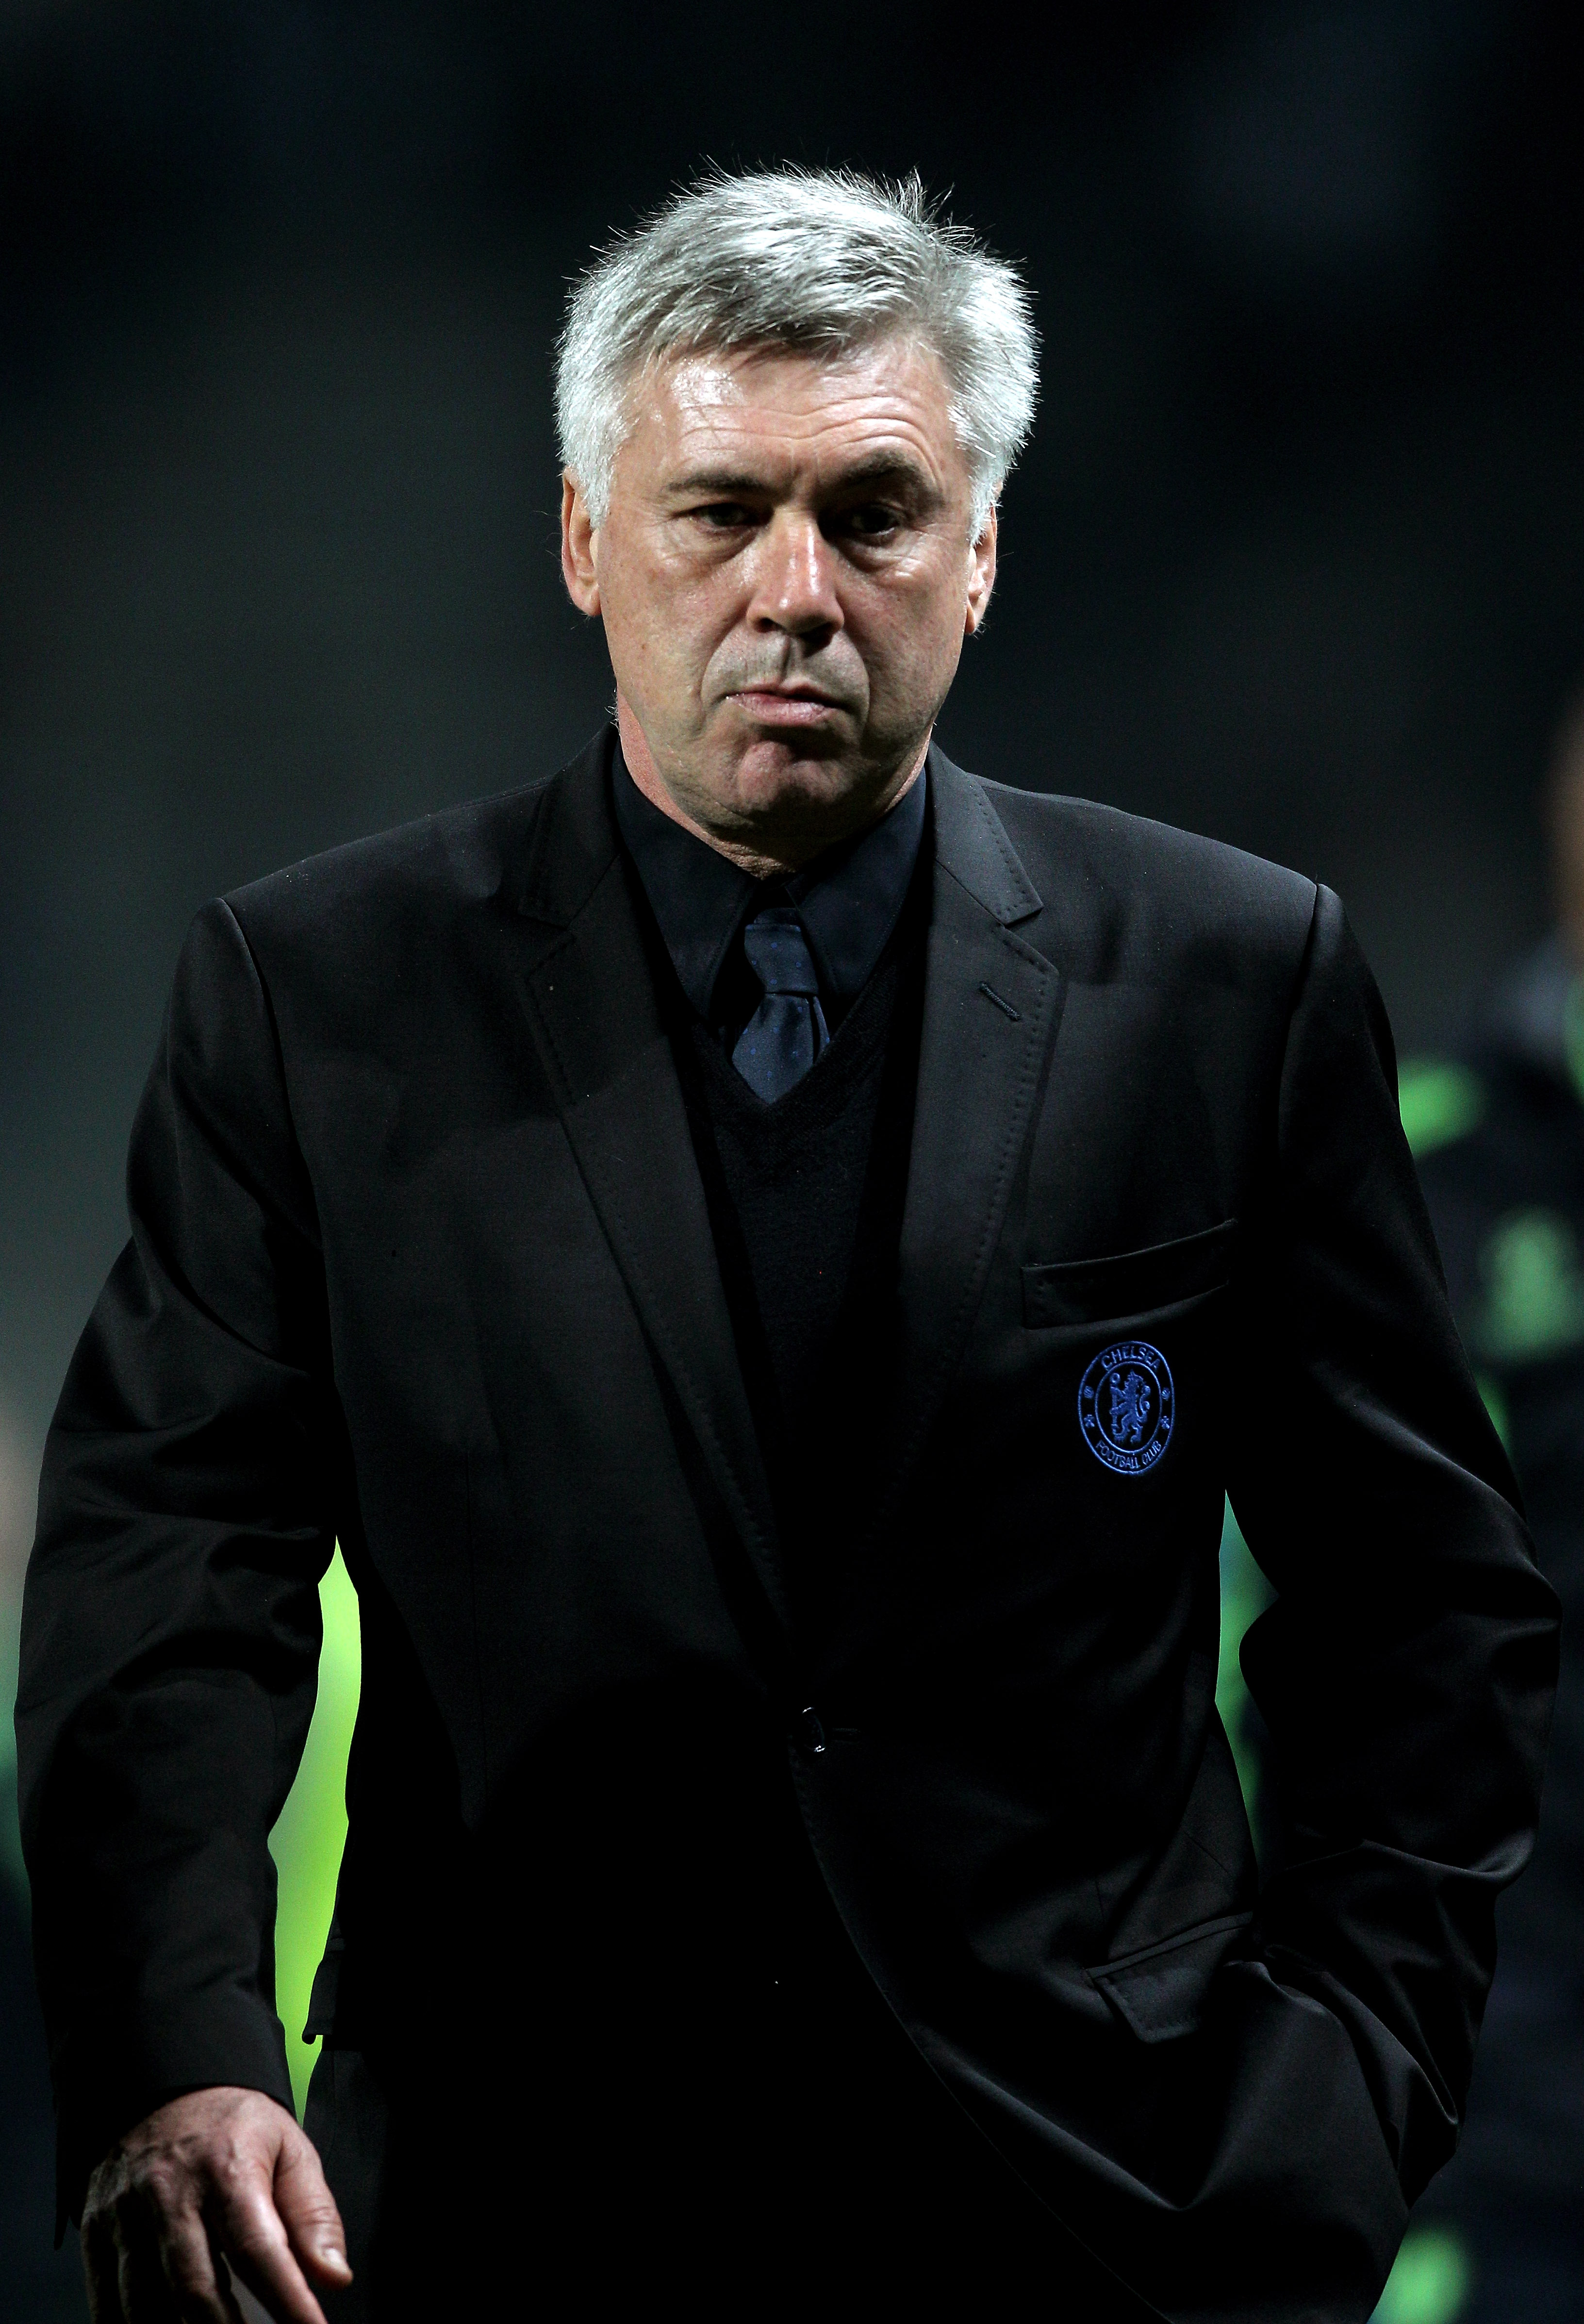 MARSEILLE, FRANCE - DECEMBER 08:  A dejected Carlo Ancelotti the Chelsea manager walks off the pitch following his team's 1-0 defeat during the UEFA Champions League Group F match between Marseille and Chelsea at the Stade Velodrome on December 8, 2010 in